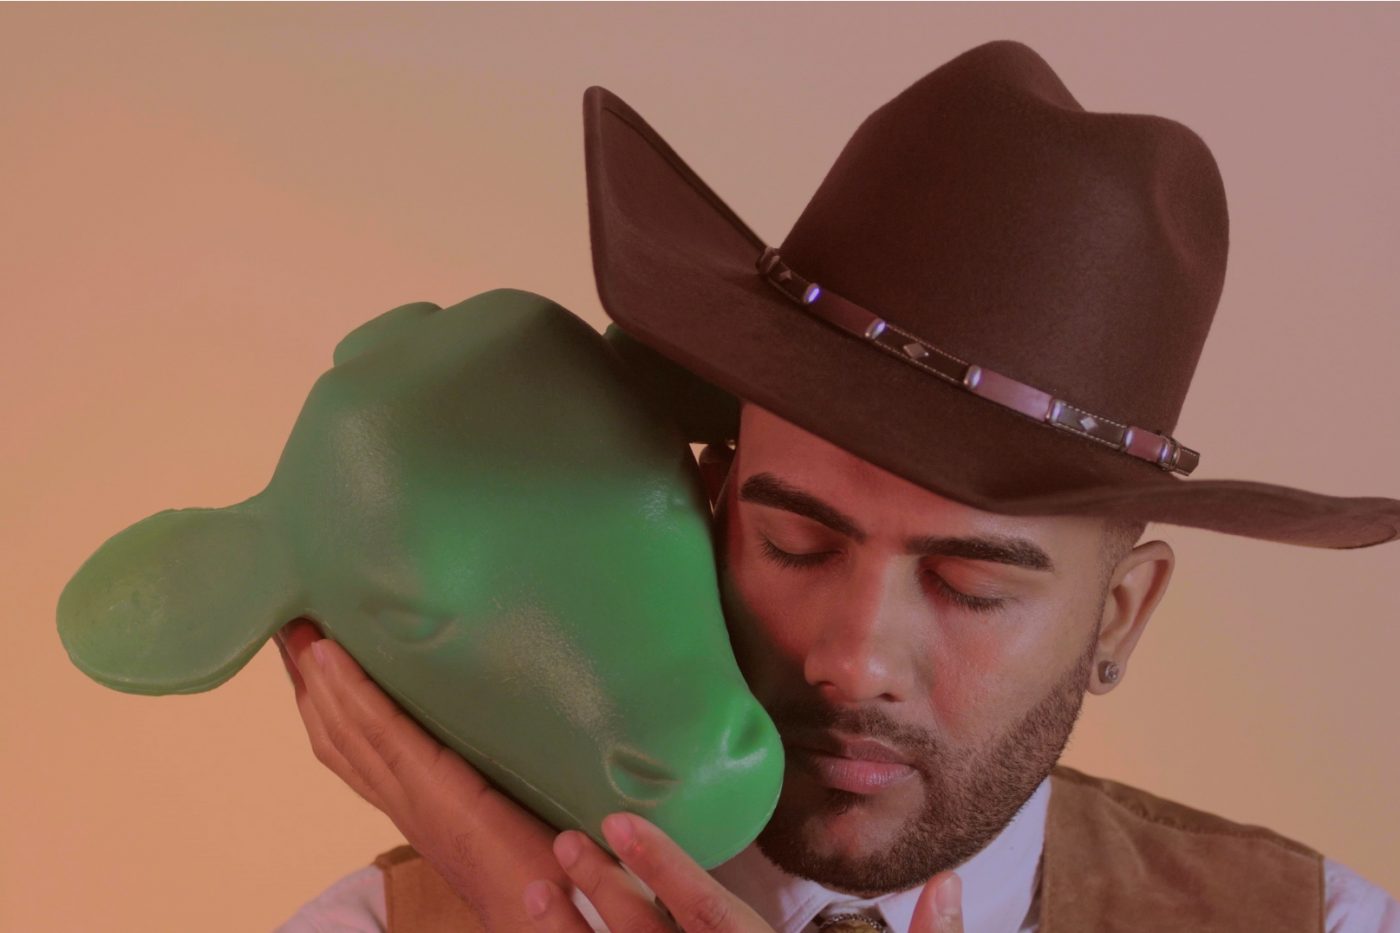 A tight shot of an Asian man dressed in a white collared shirt, brown suede vest, and brown cowboy hat. He has dark brown eyebrows, a close cut bread, and is wearing stud earrings. Perched on his shoulder, gently propped up by his hands, is a green mold of a cow’s head. He is tilting his head gently with his eyes closed so that his head and the cow’s head together create the shape of a heart.